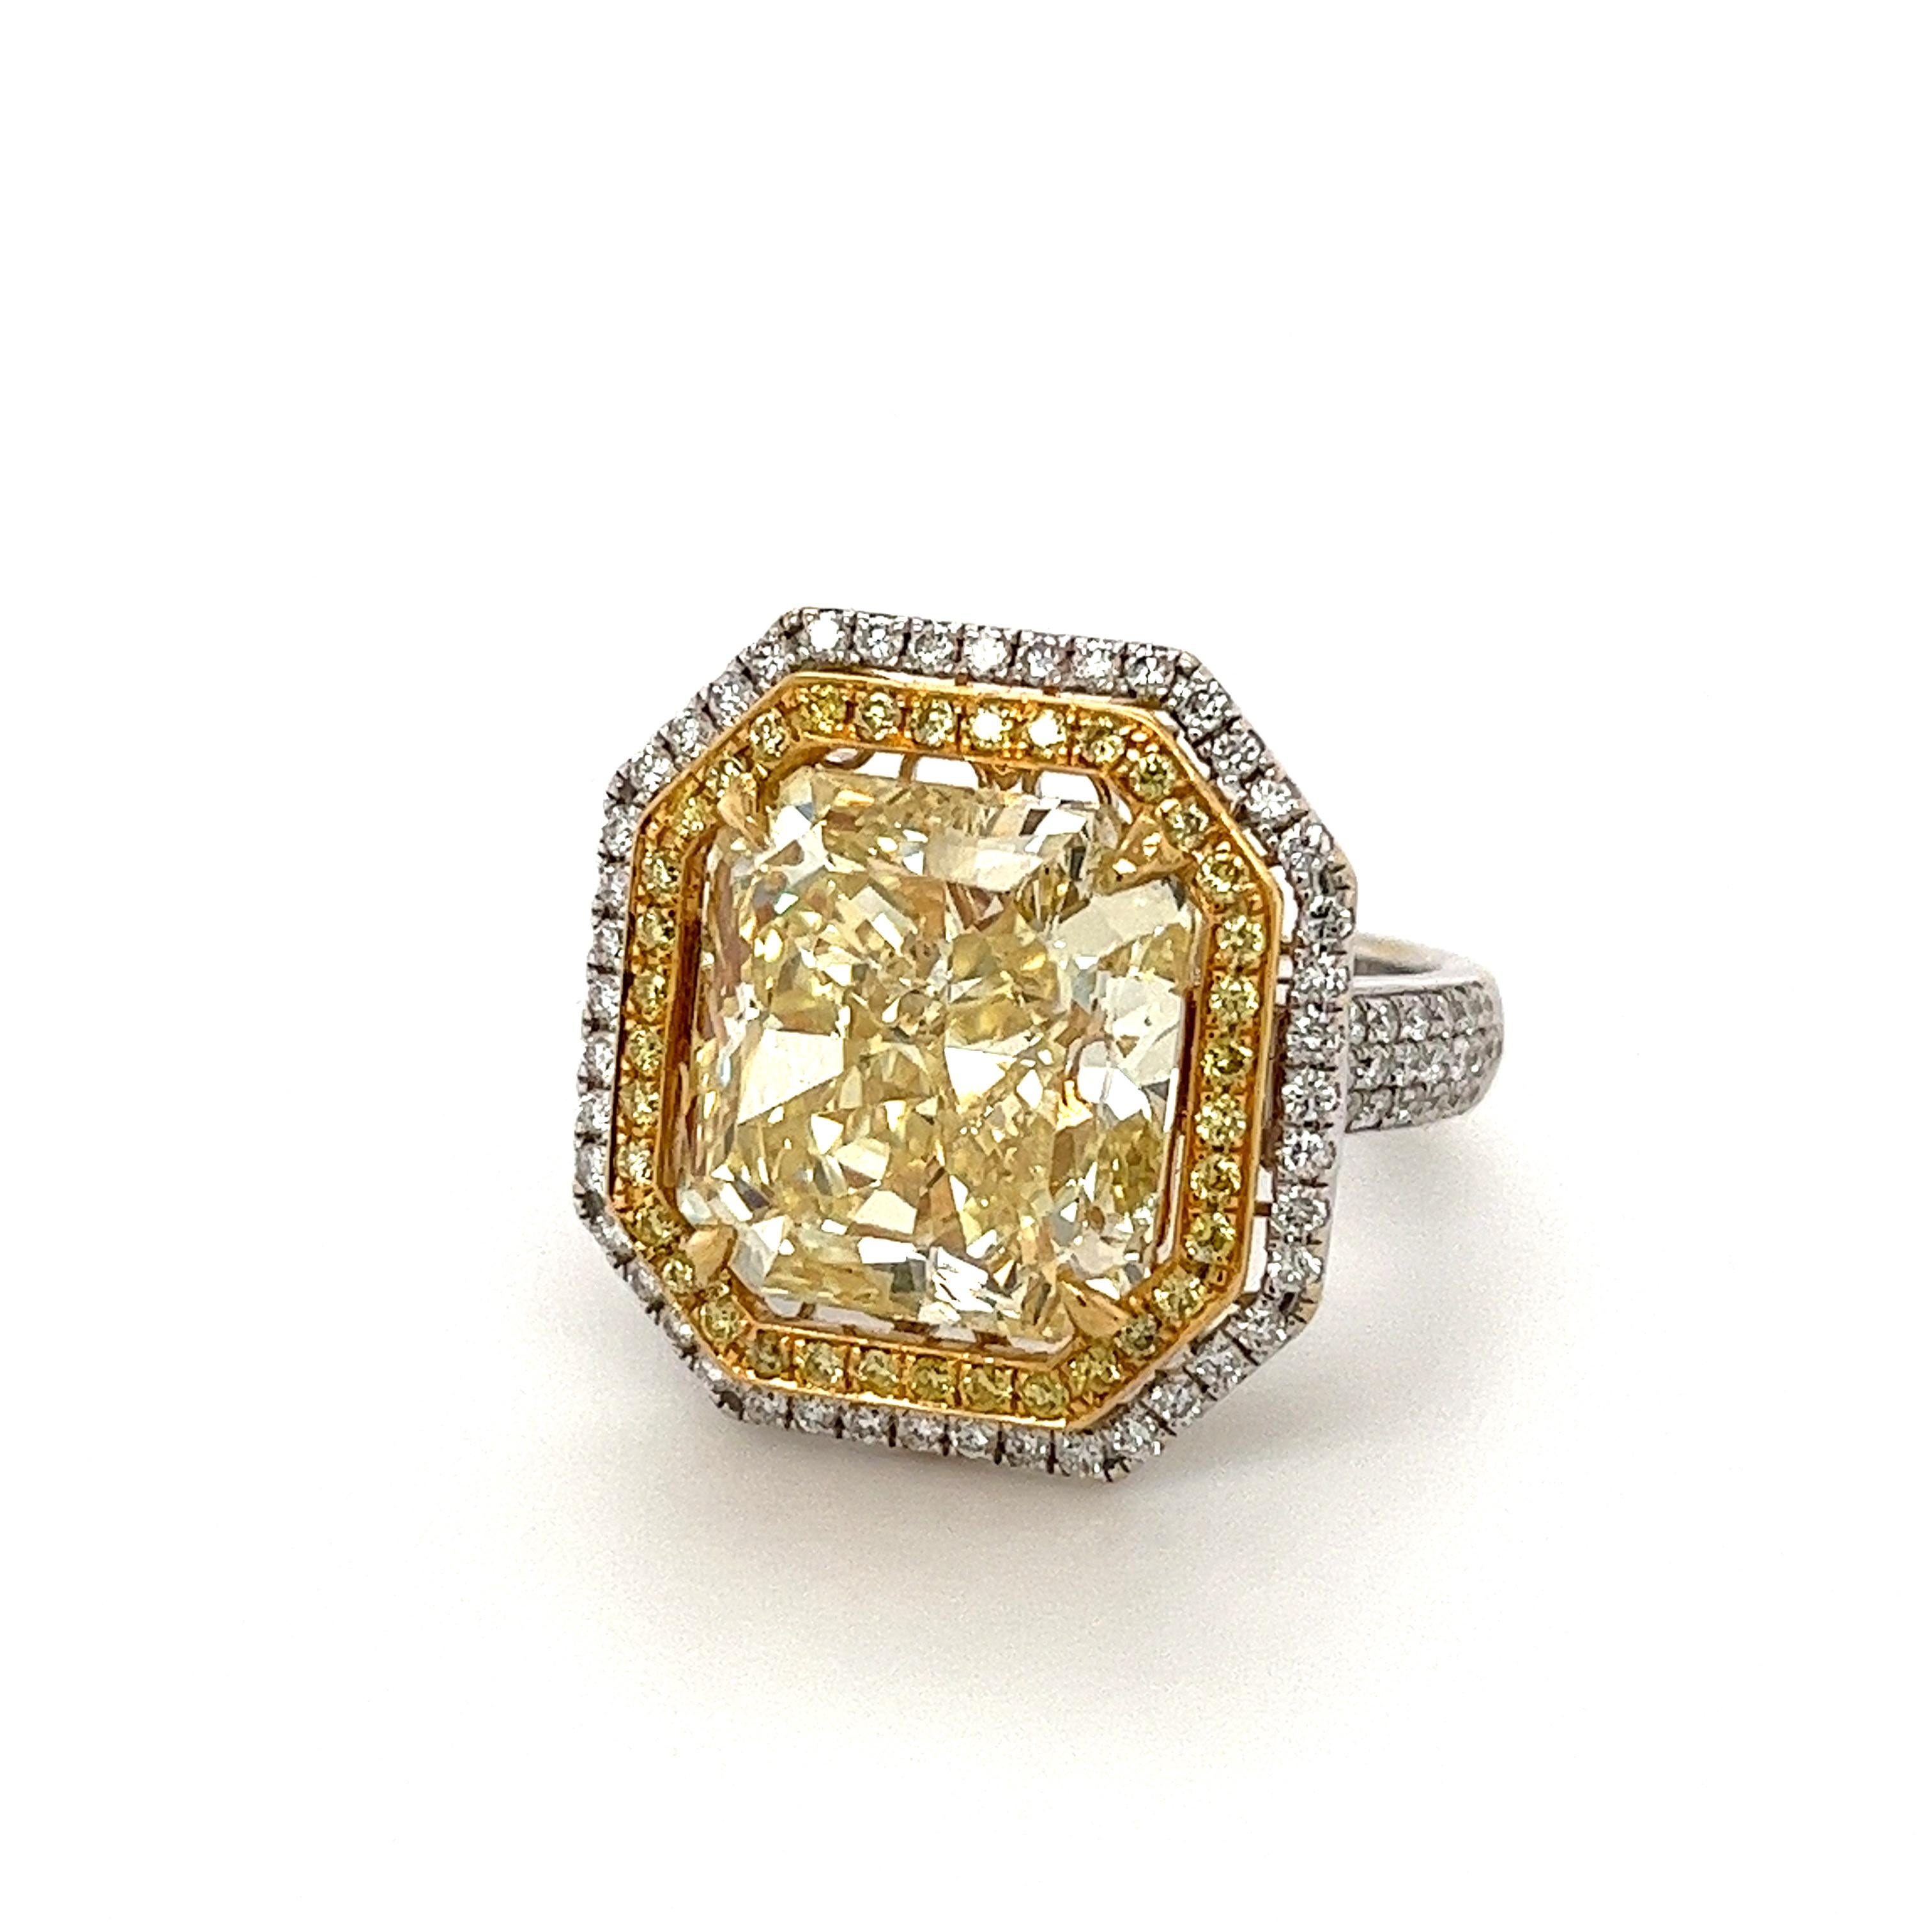 GIA Certified 10.88 Carat Fancy Yellow Radiant Cut Diamond Ring in White Gold In New Condition For Sale In Miami, FL